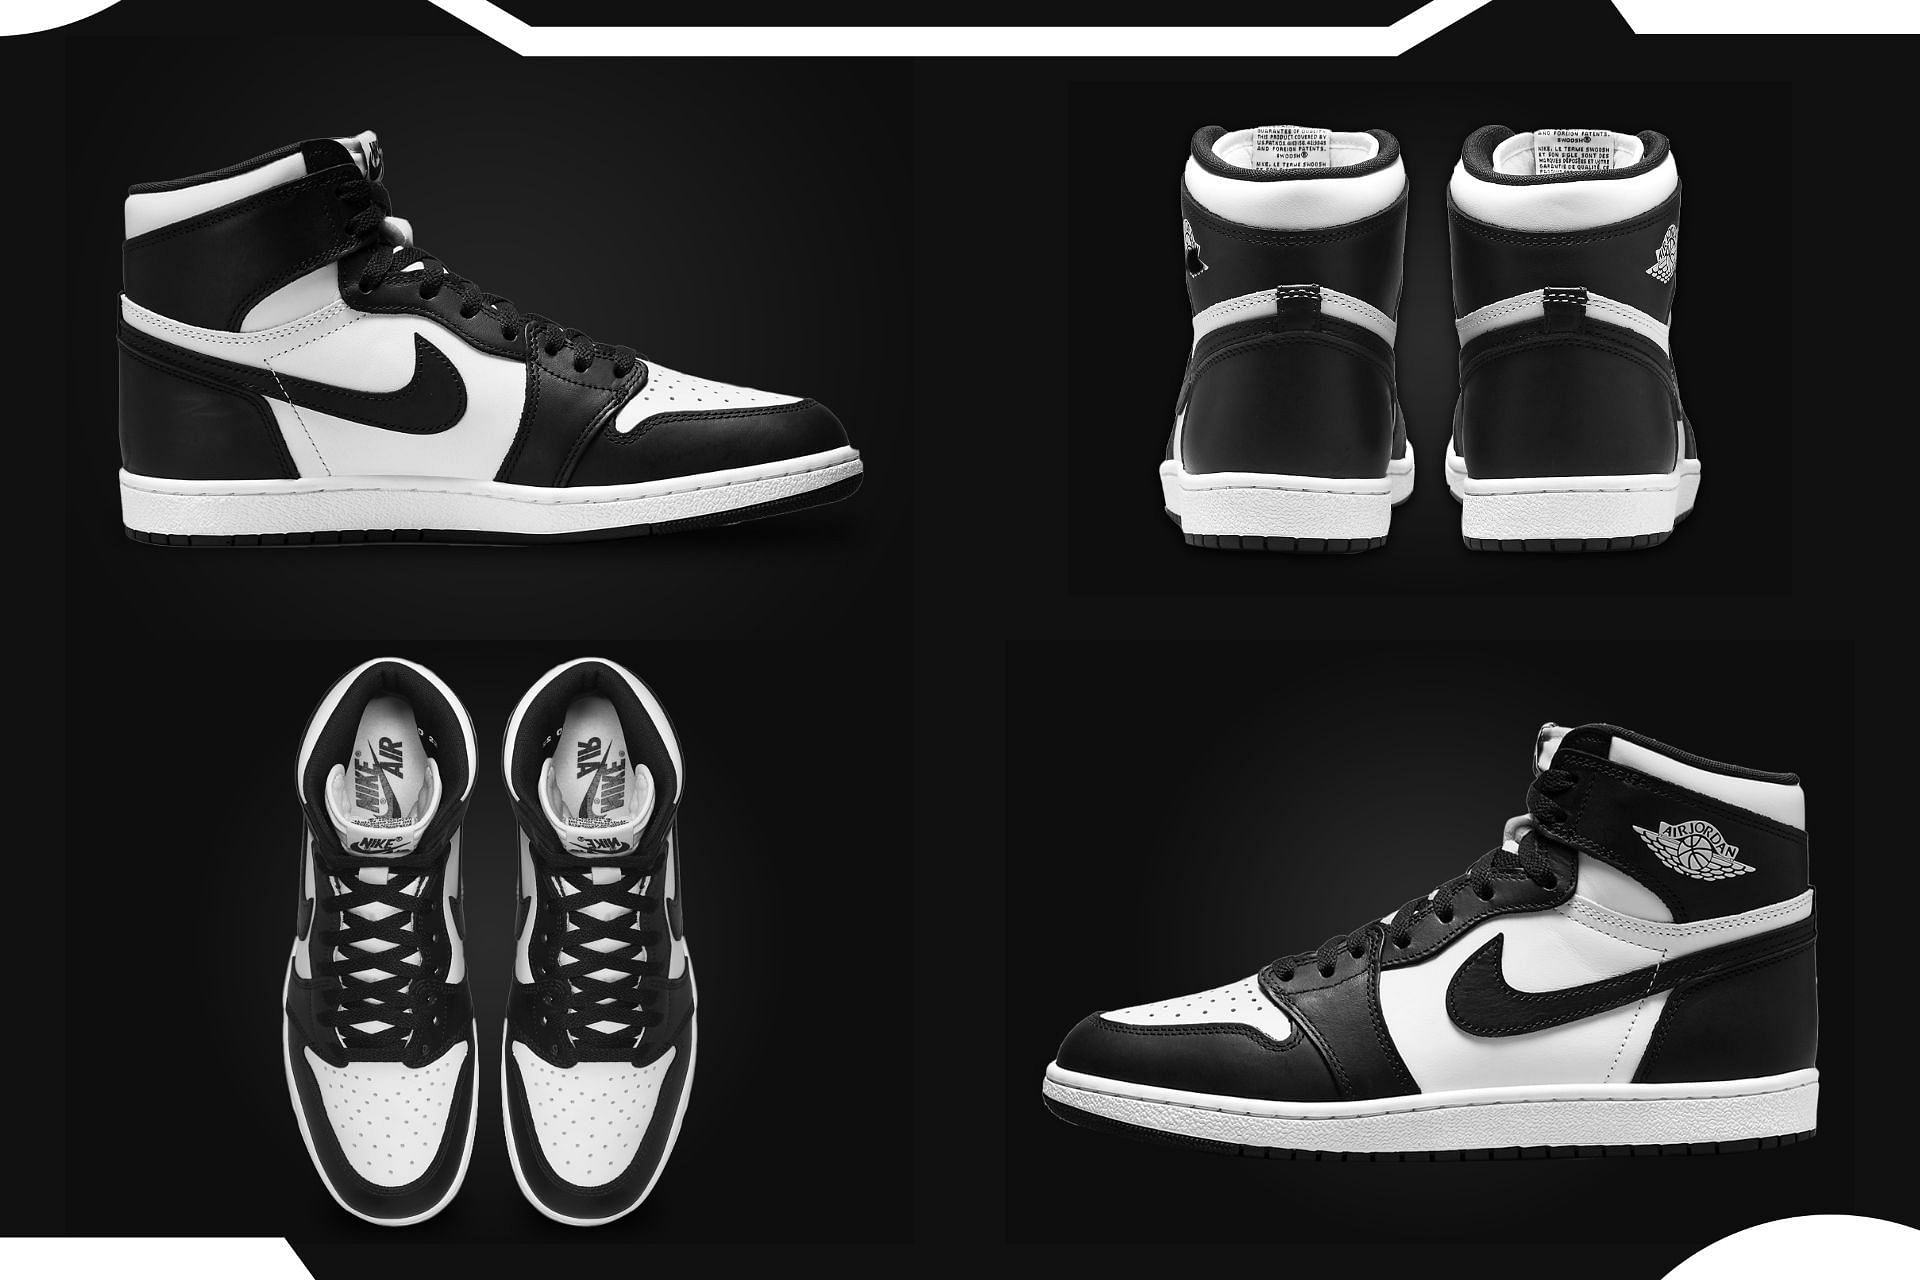 Upcoming Nike Air Jordan 1 High 85 &quot;Black White&quot; sneakers reminiscent of the iconic &quot;Panda&quot; colorway (Image via Sportskeeda)